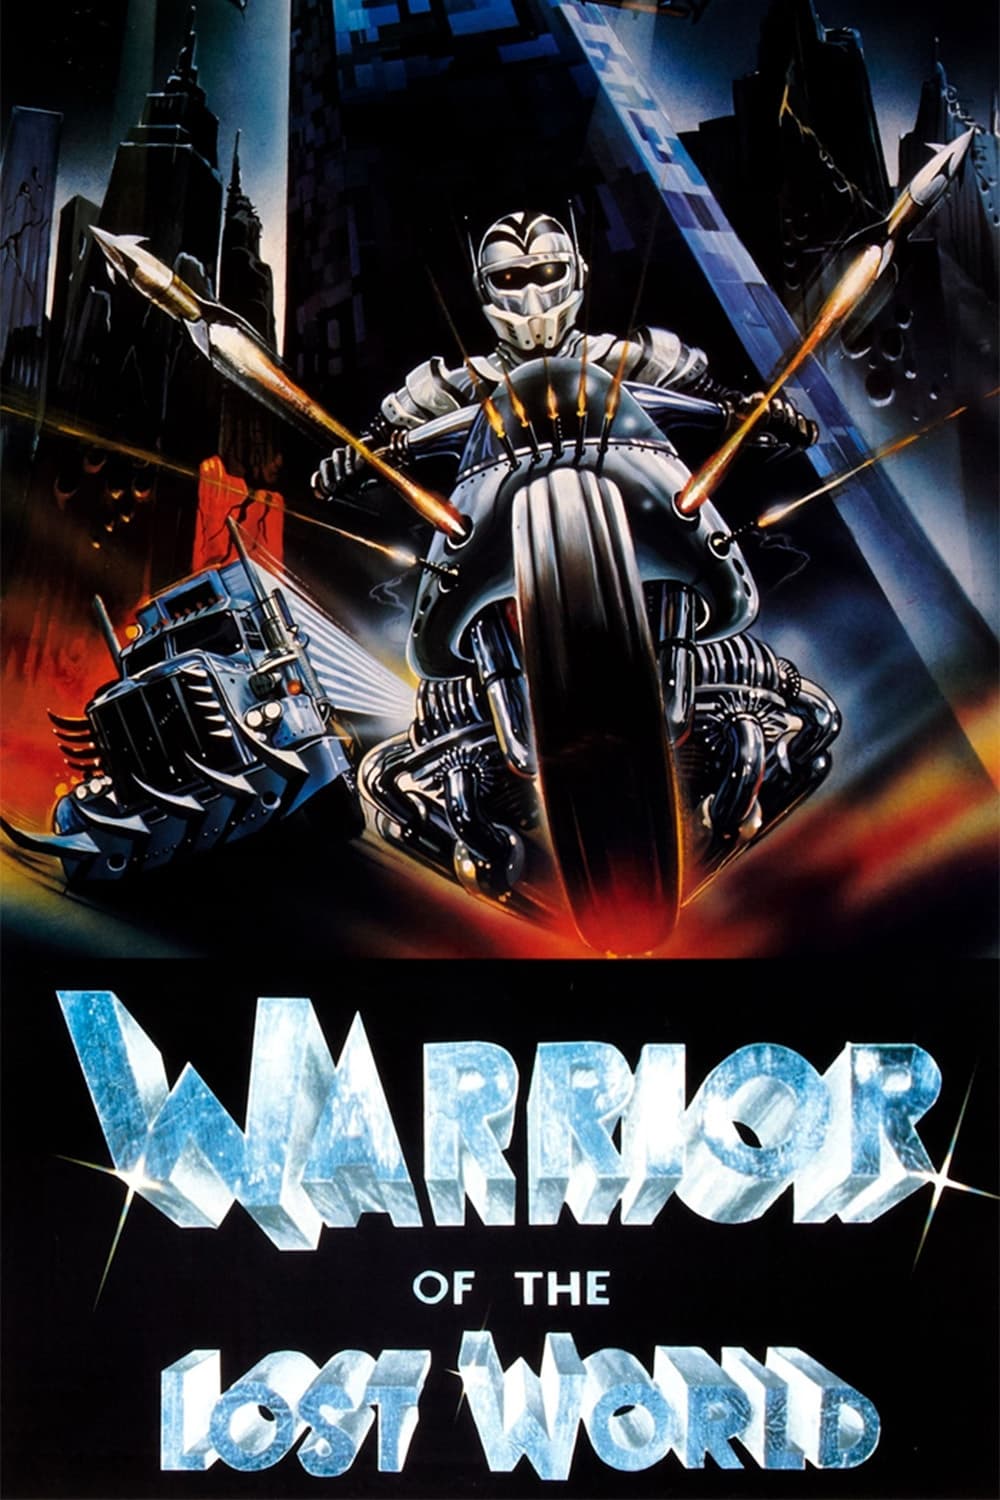 Warrior of the Lost World (1983)